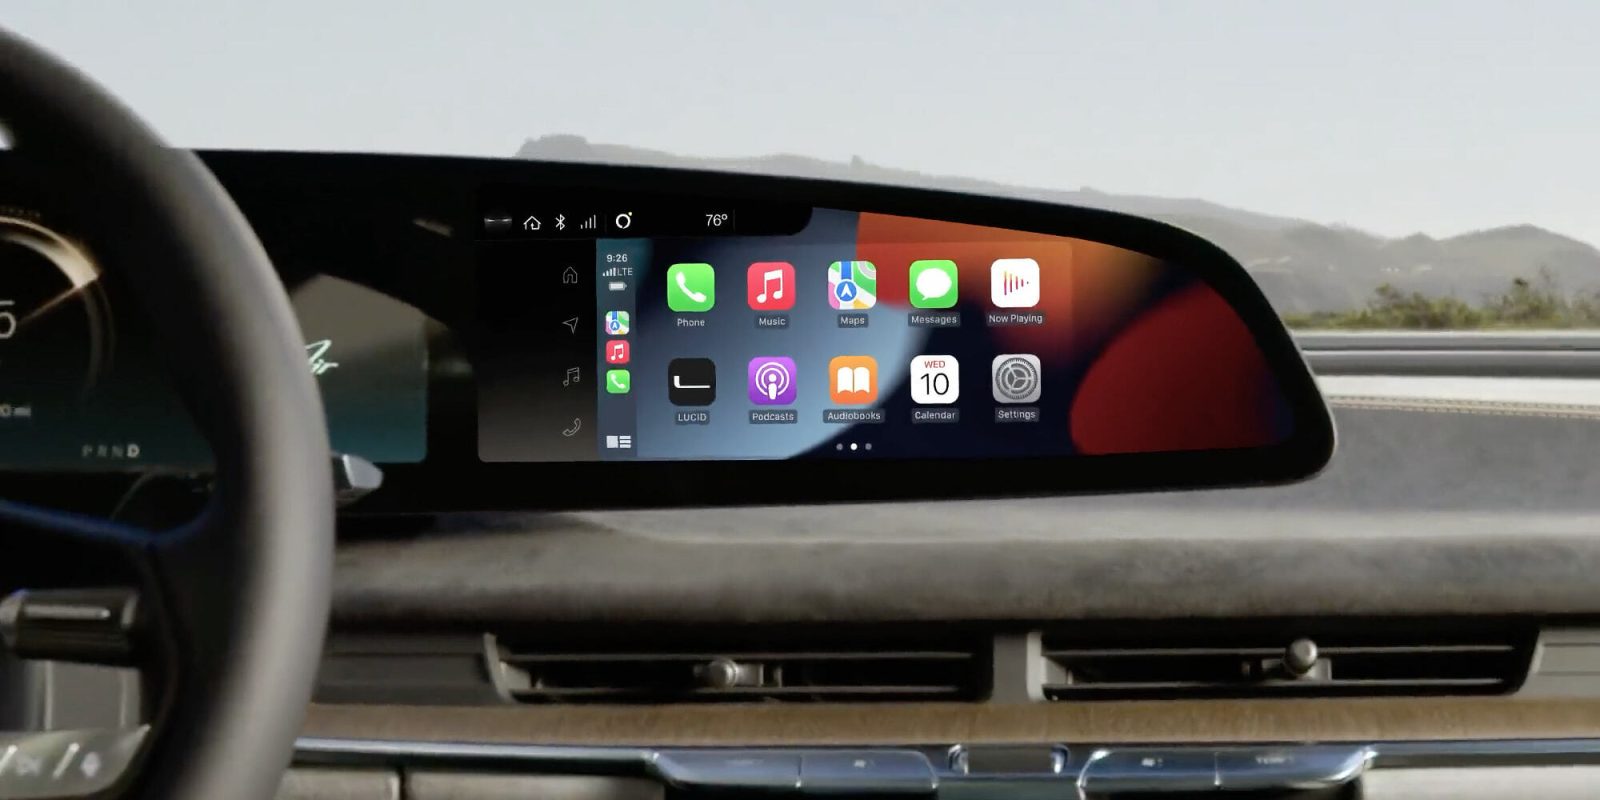 Tesla competitor Lucid Air luxury EV gets wireless Apple CarPlay and Android Auto